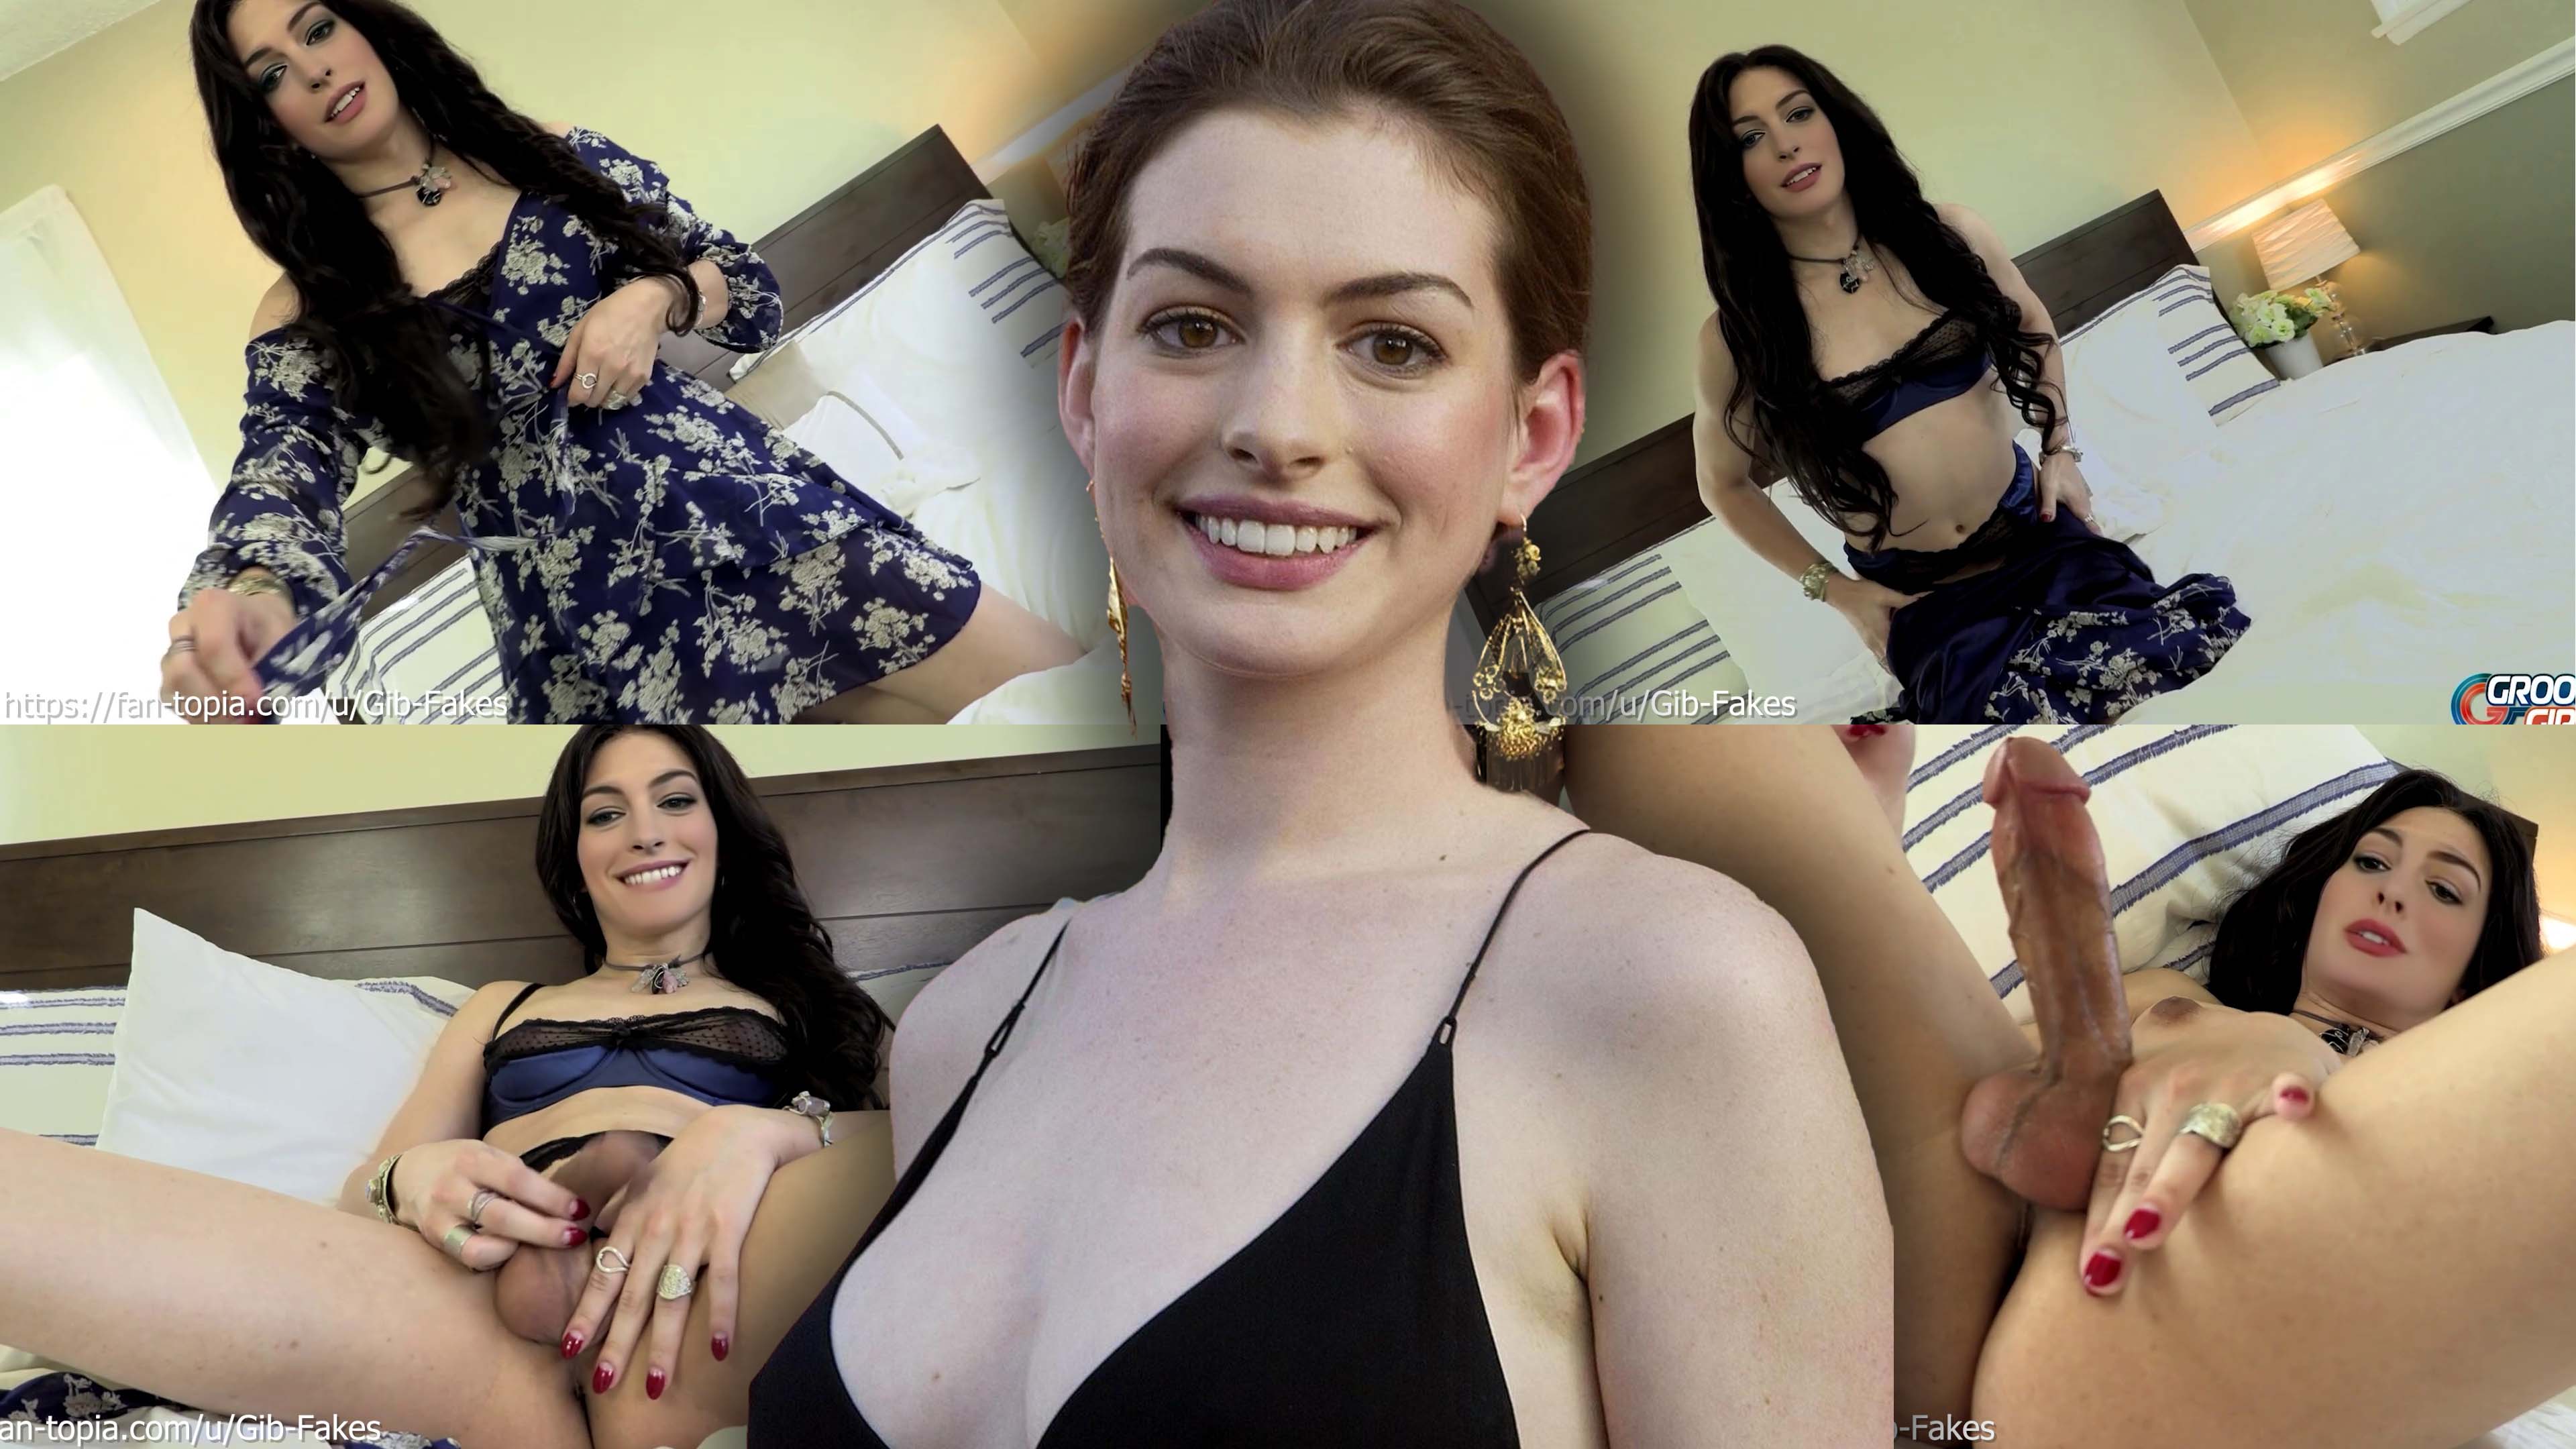 Celebrity Tranny Ass - Anne Hathaway Wants You to Join Her on the Bed for a Wank (trans) DeepFake  Porn - MrDeepFakes